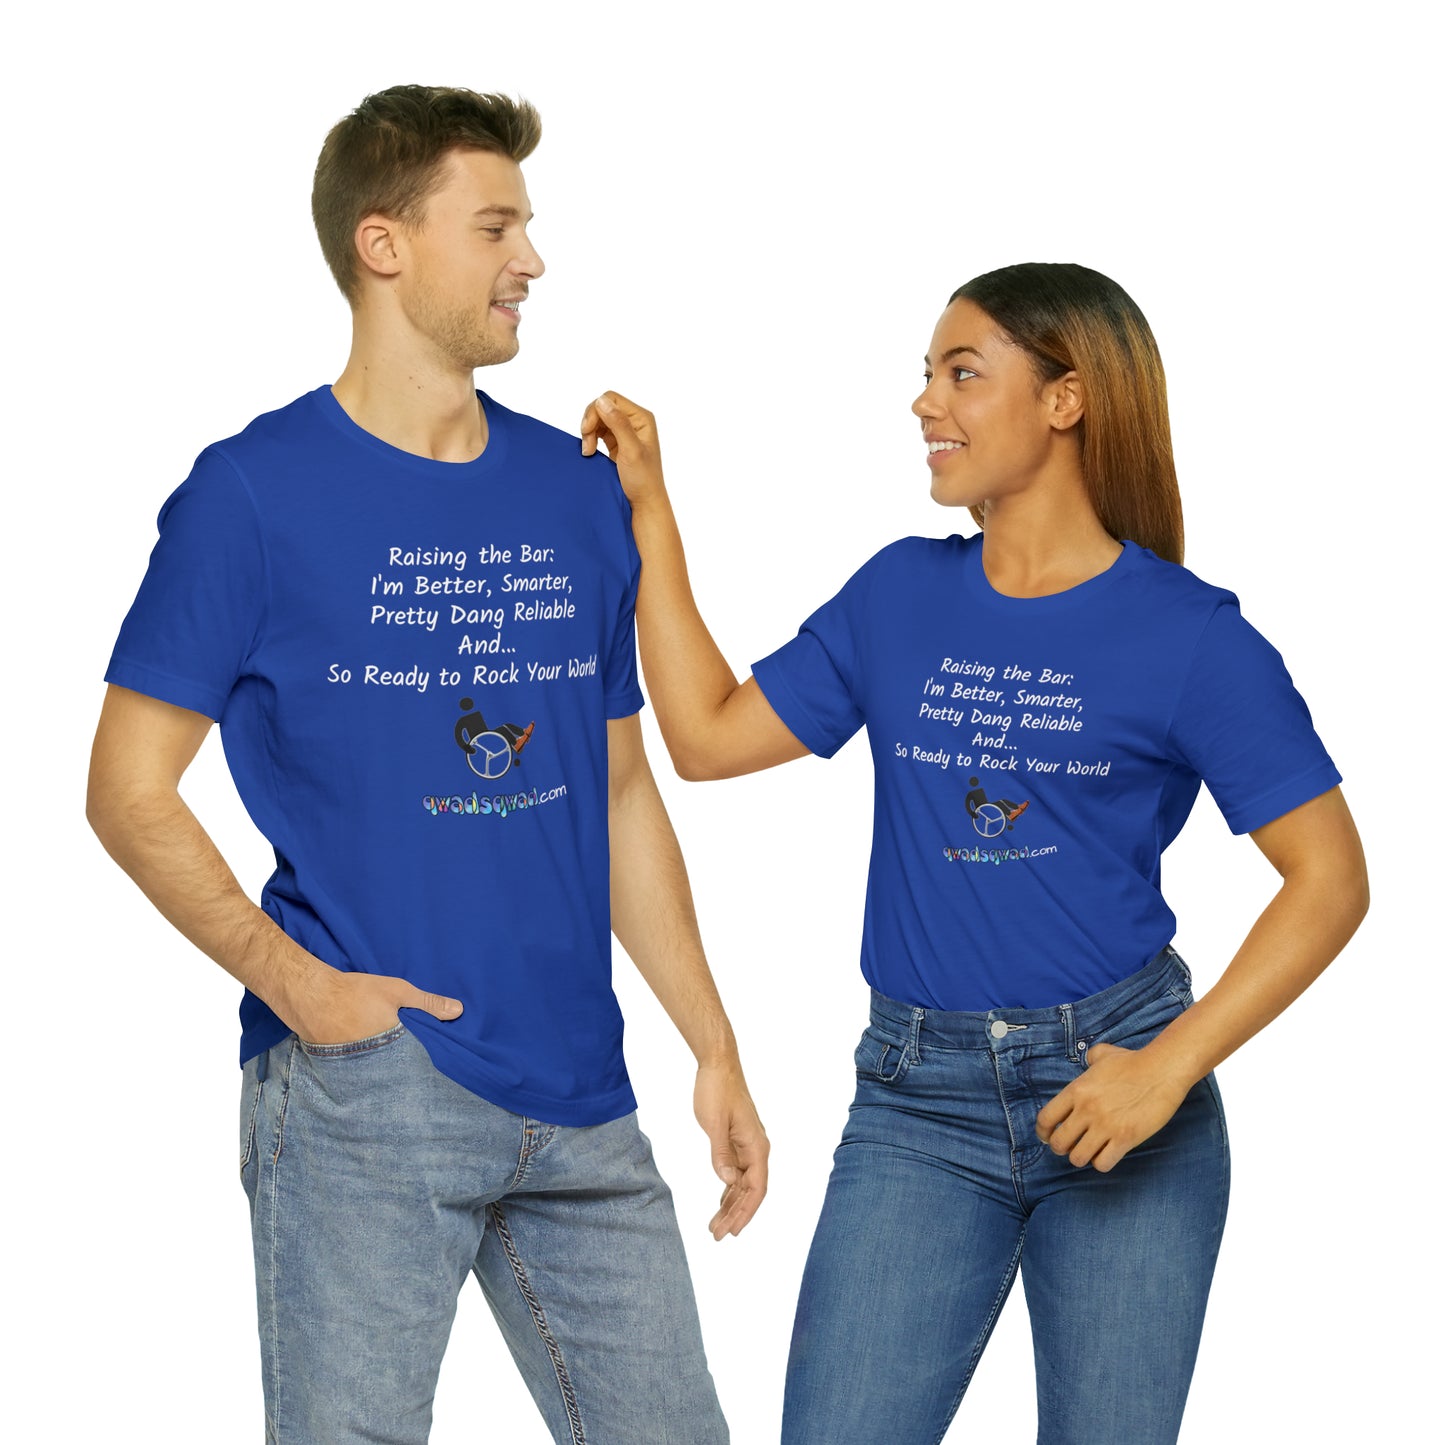 Breaking Stereotypes and Empowering: – Smarter, Reliable, and More Fun ! Unisex Short Sleeve Tee